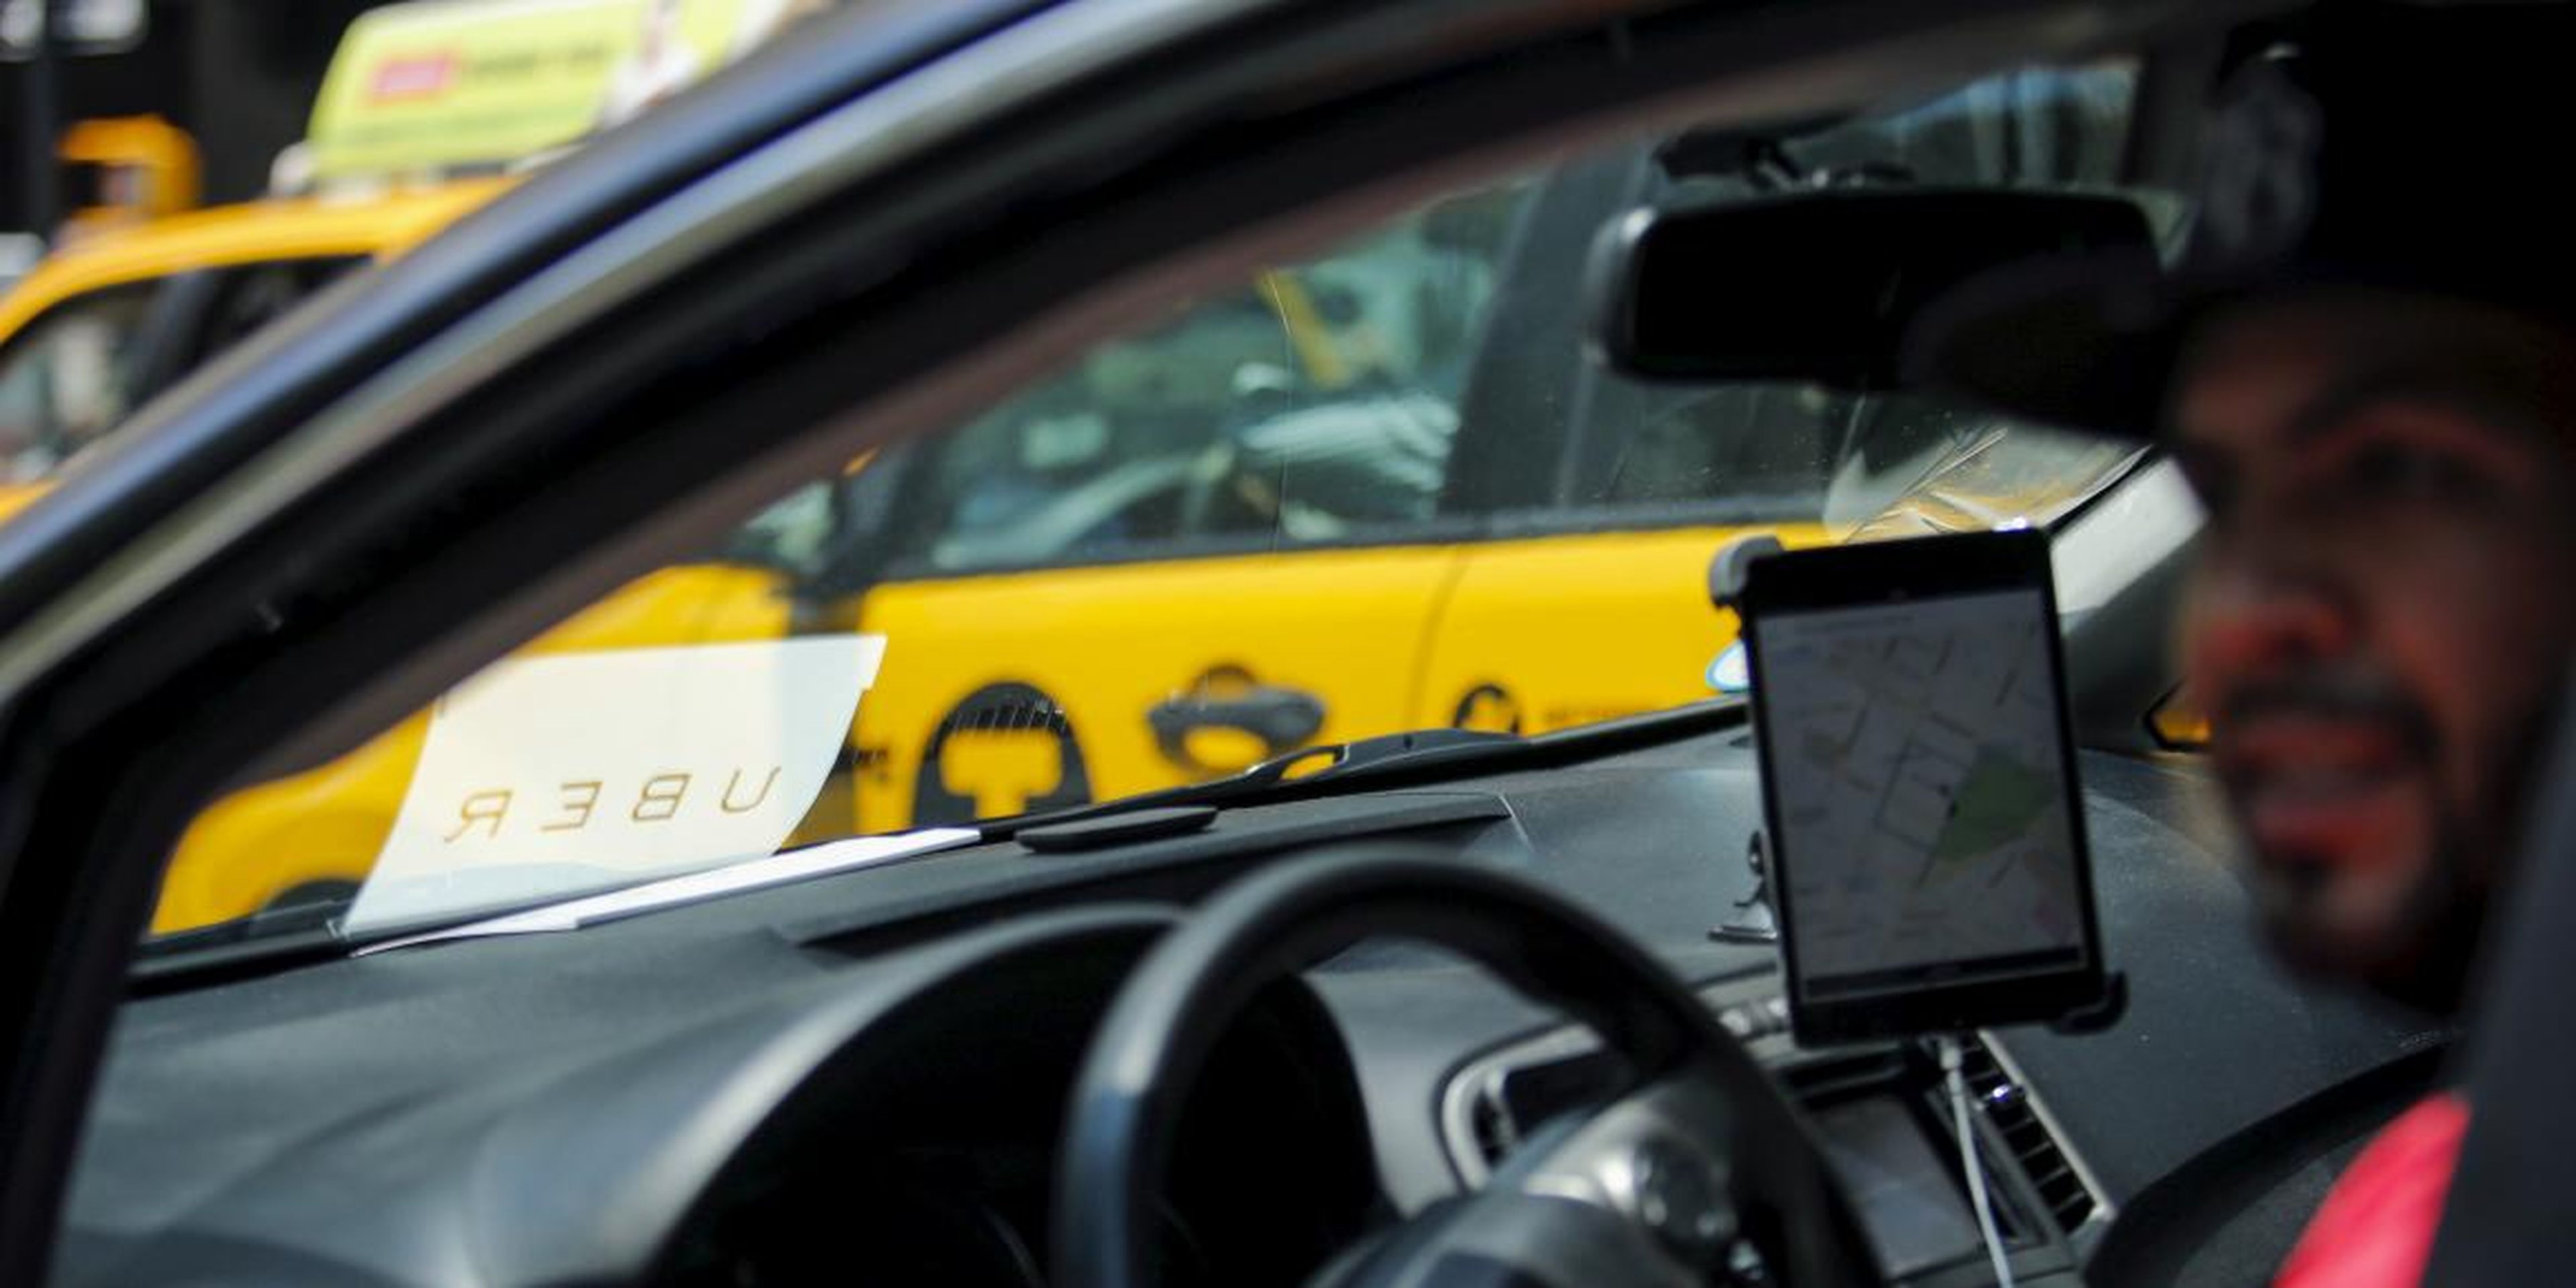 Uber has filed a new lawsuit against the city of New York.